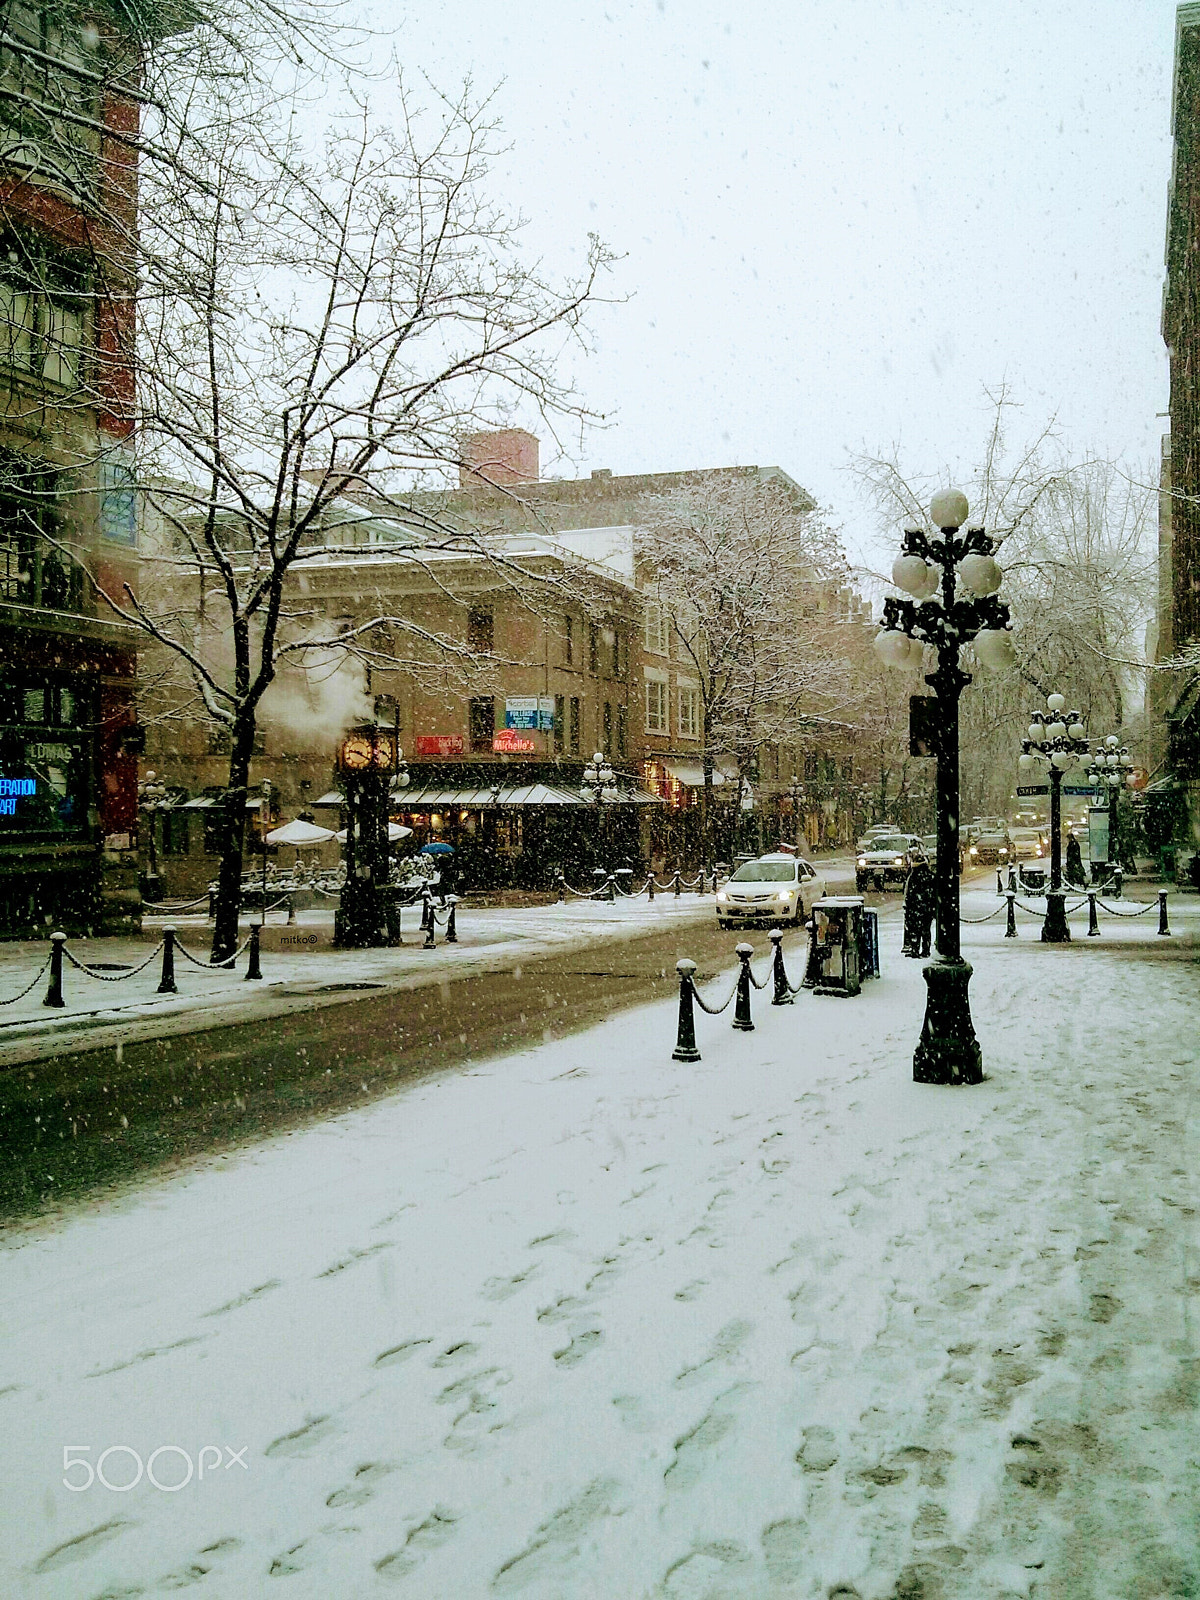 LG Nexus 4 sample photo. Waterfront street in a snowy morning photography